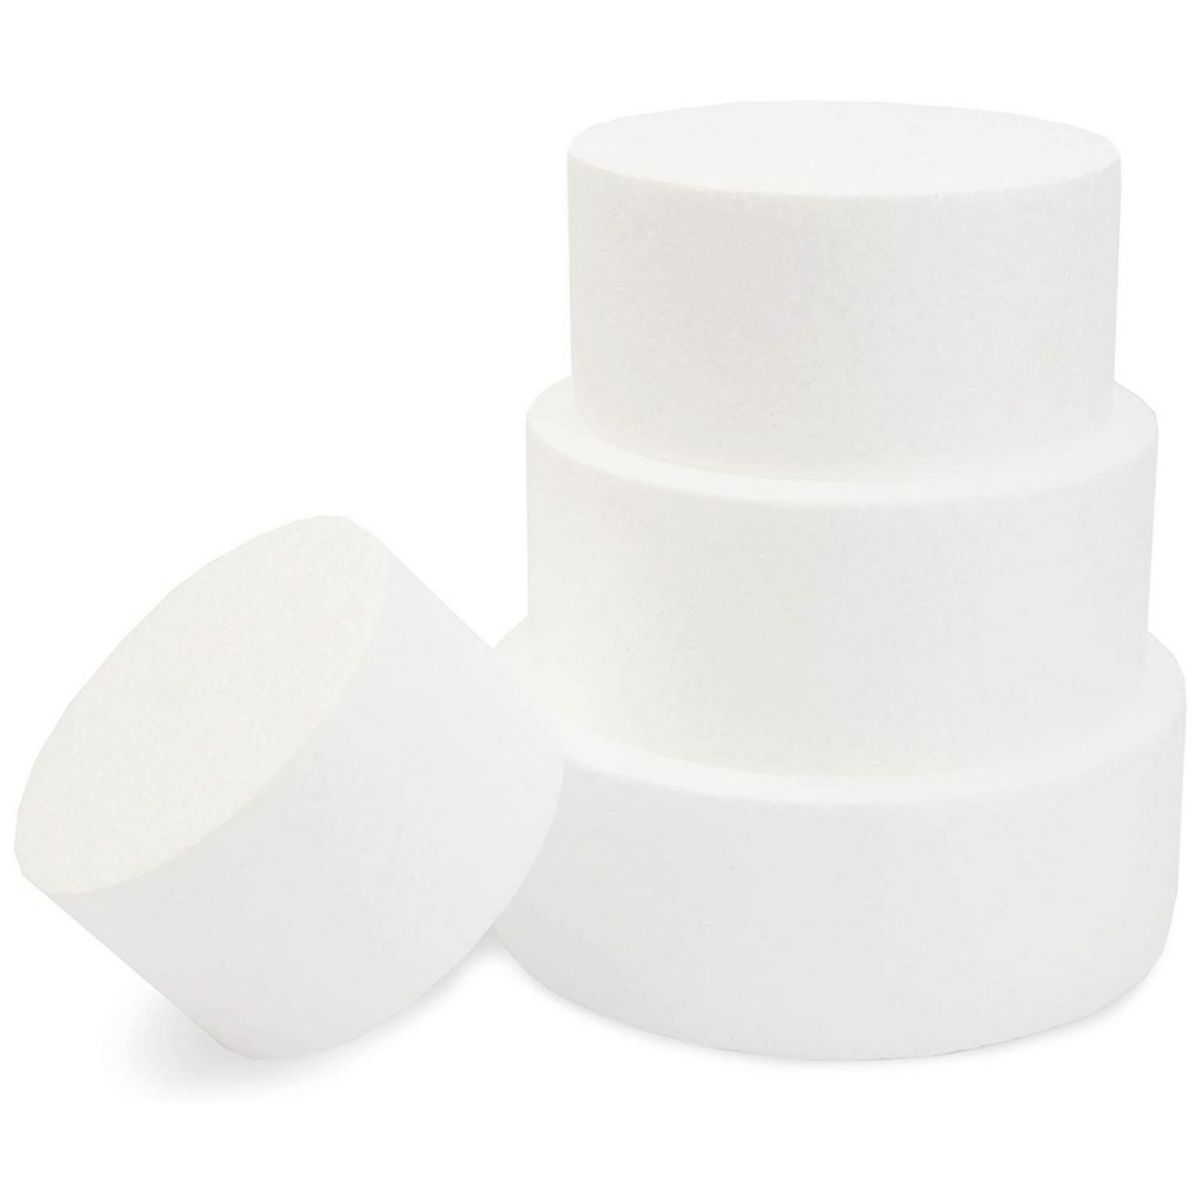 Round Foam Cake Dummy Set, 4 Tiers for Display, Arts and Crafts (White) Bright Creations